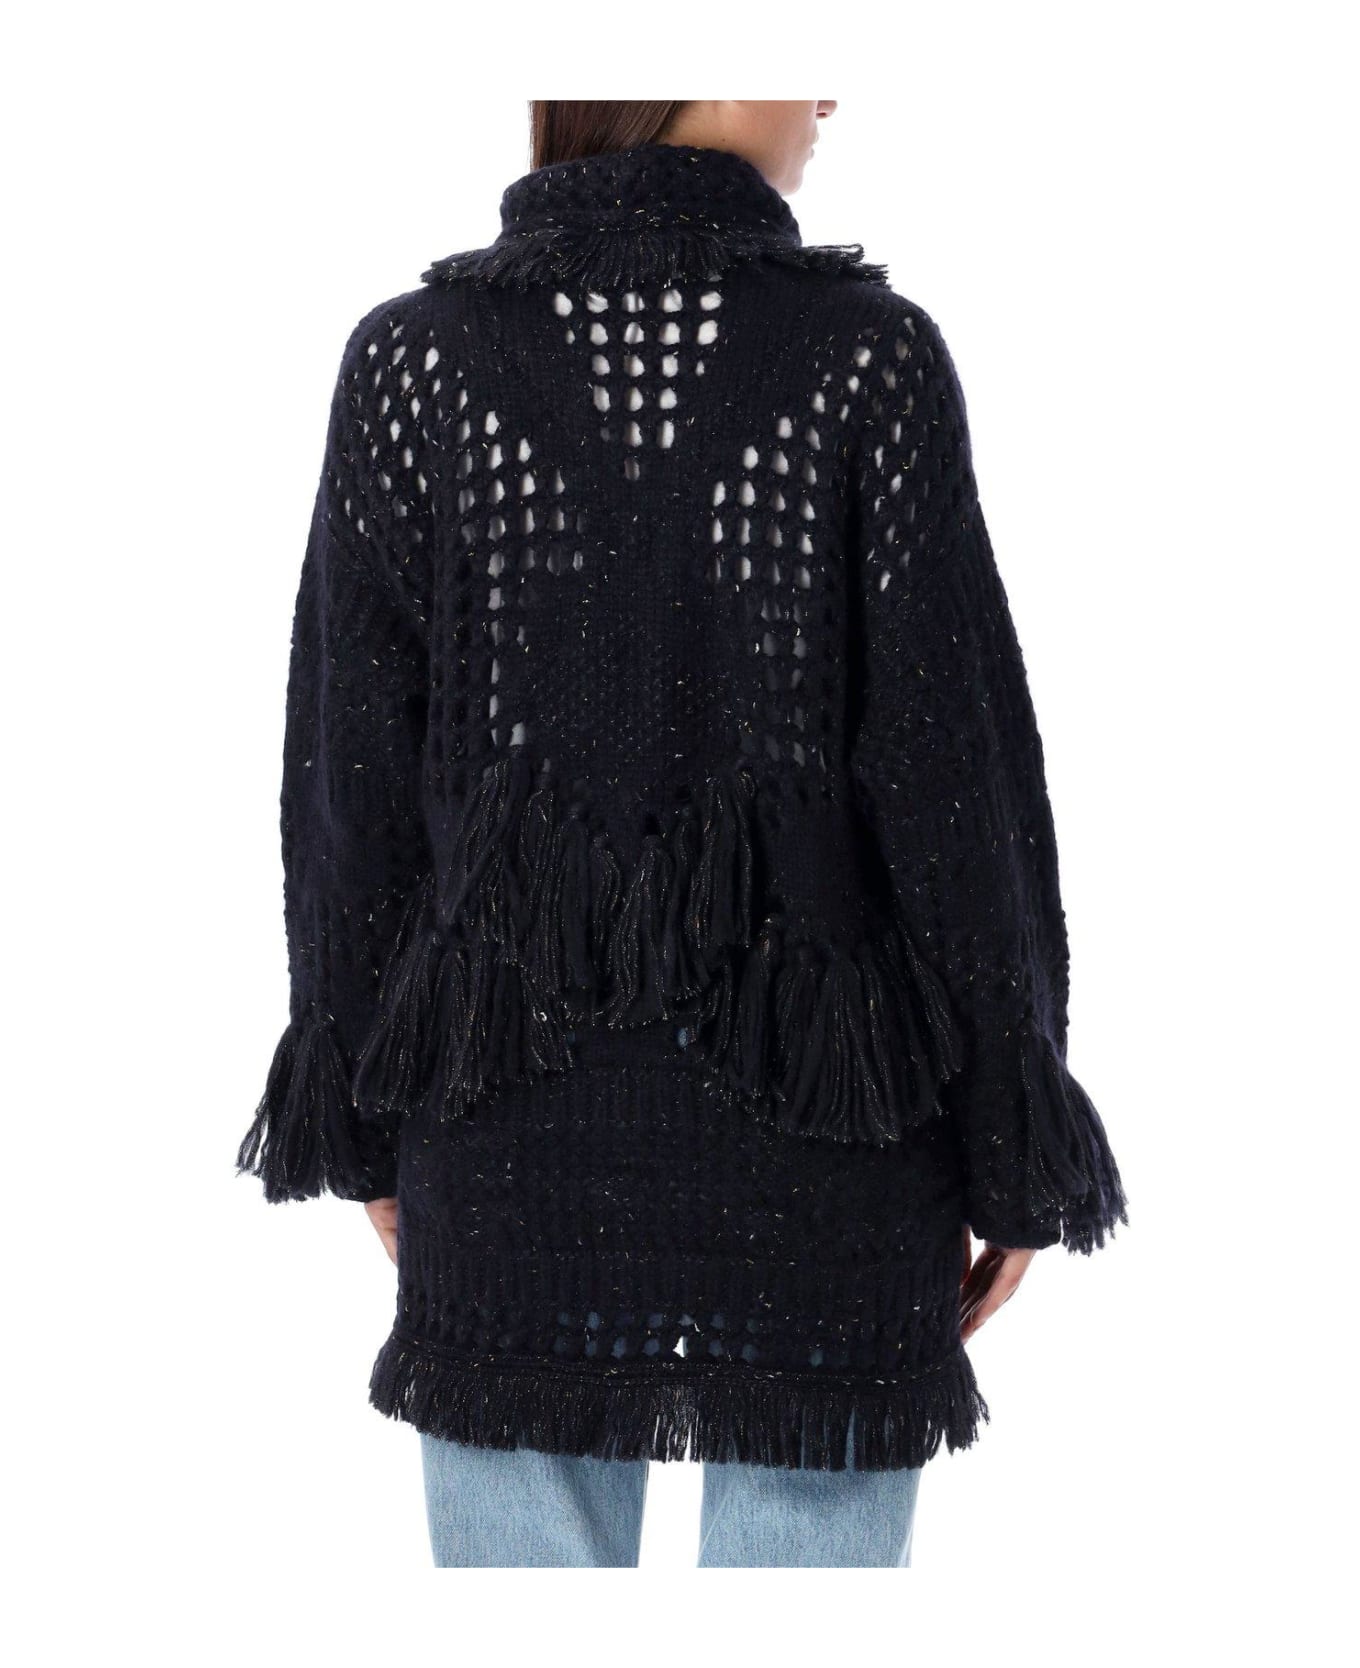 Alanui The Astral Speckle Knitted Fringed Cardigan コート